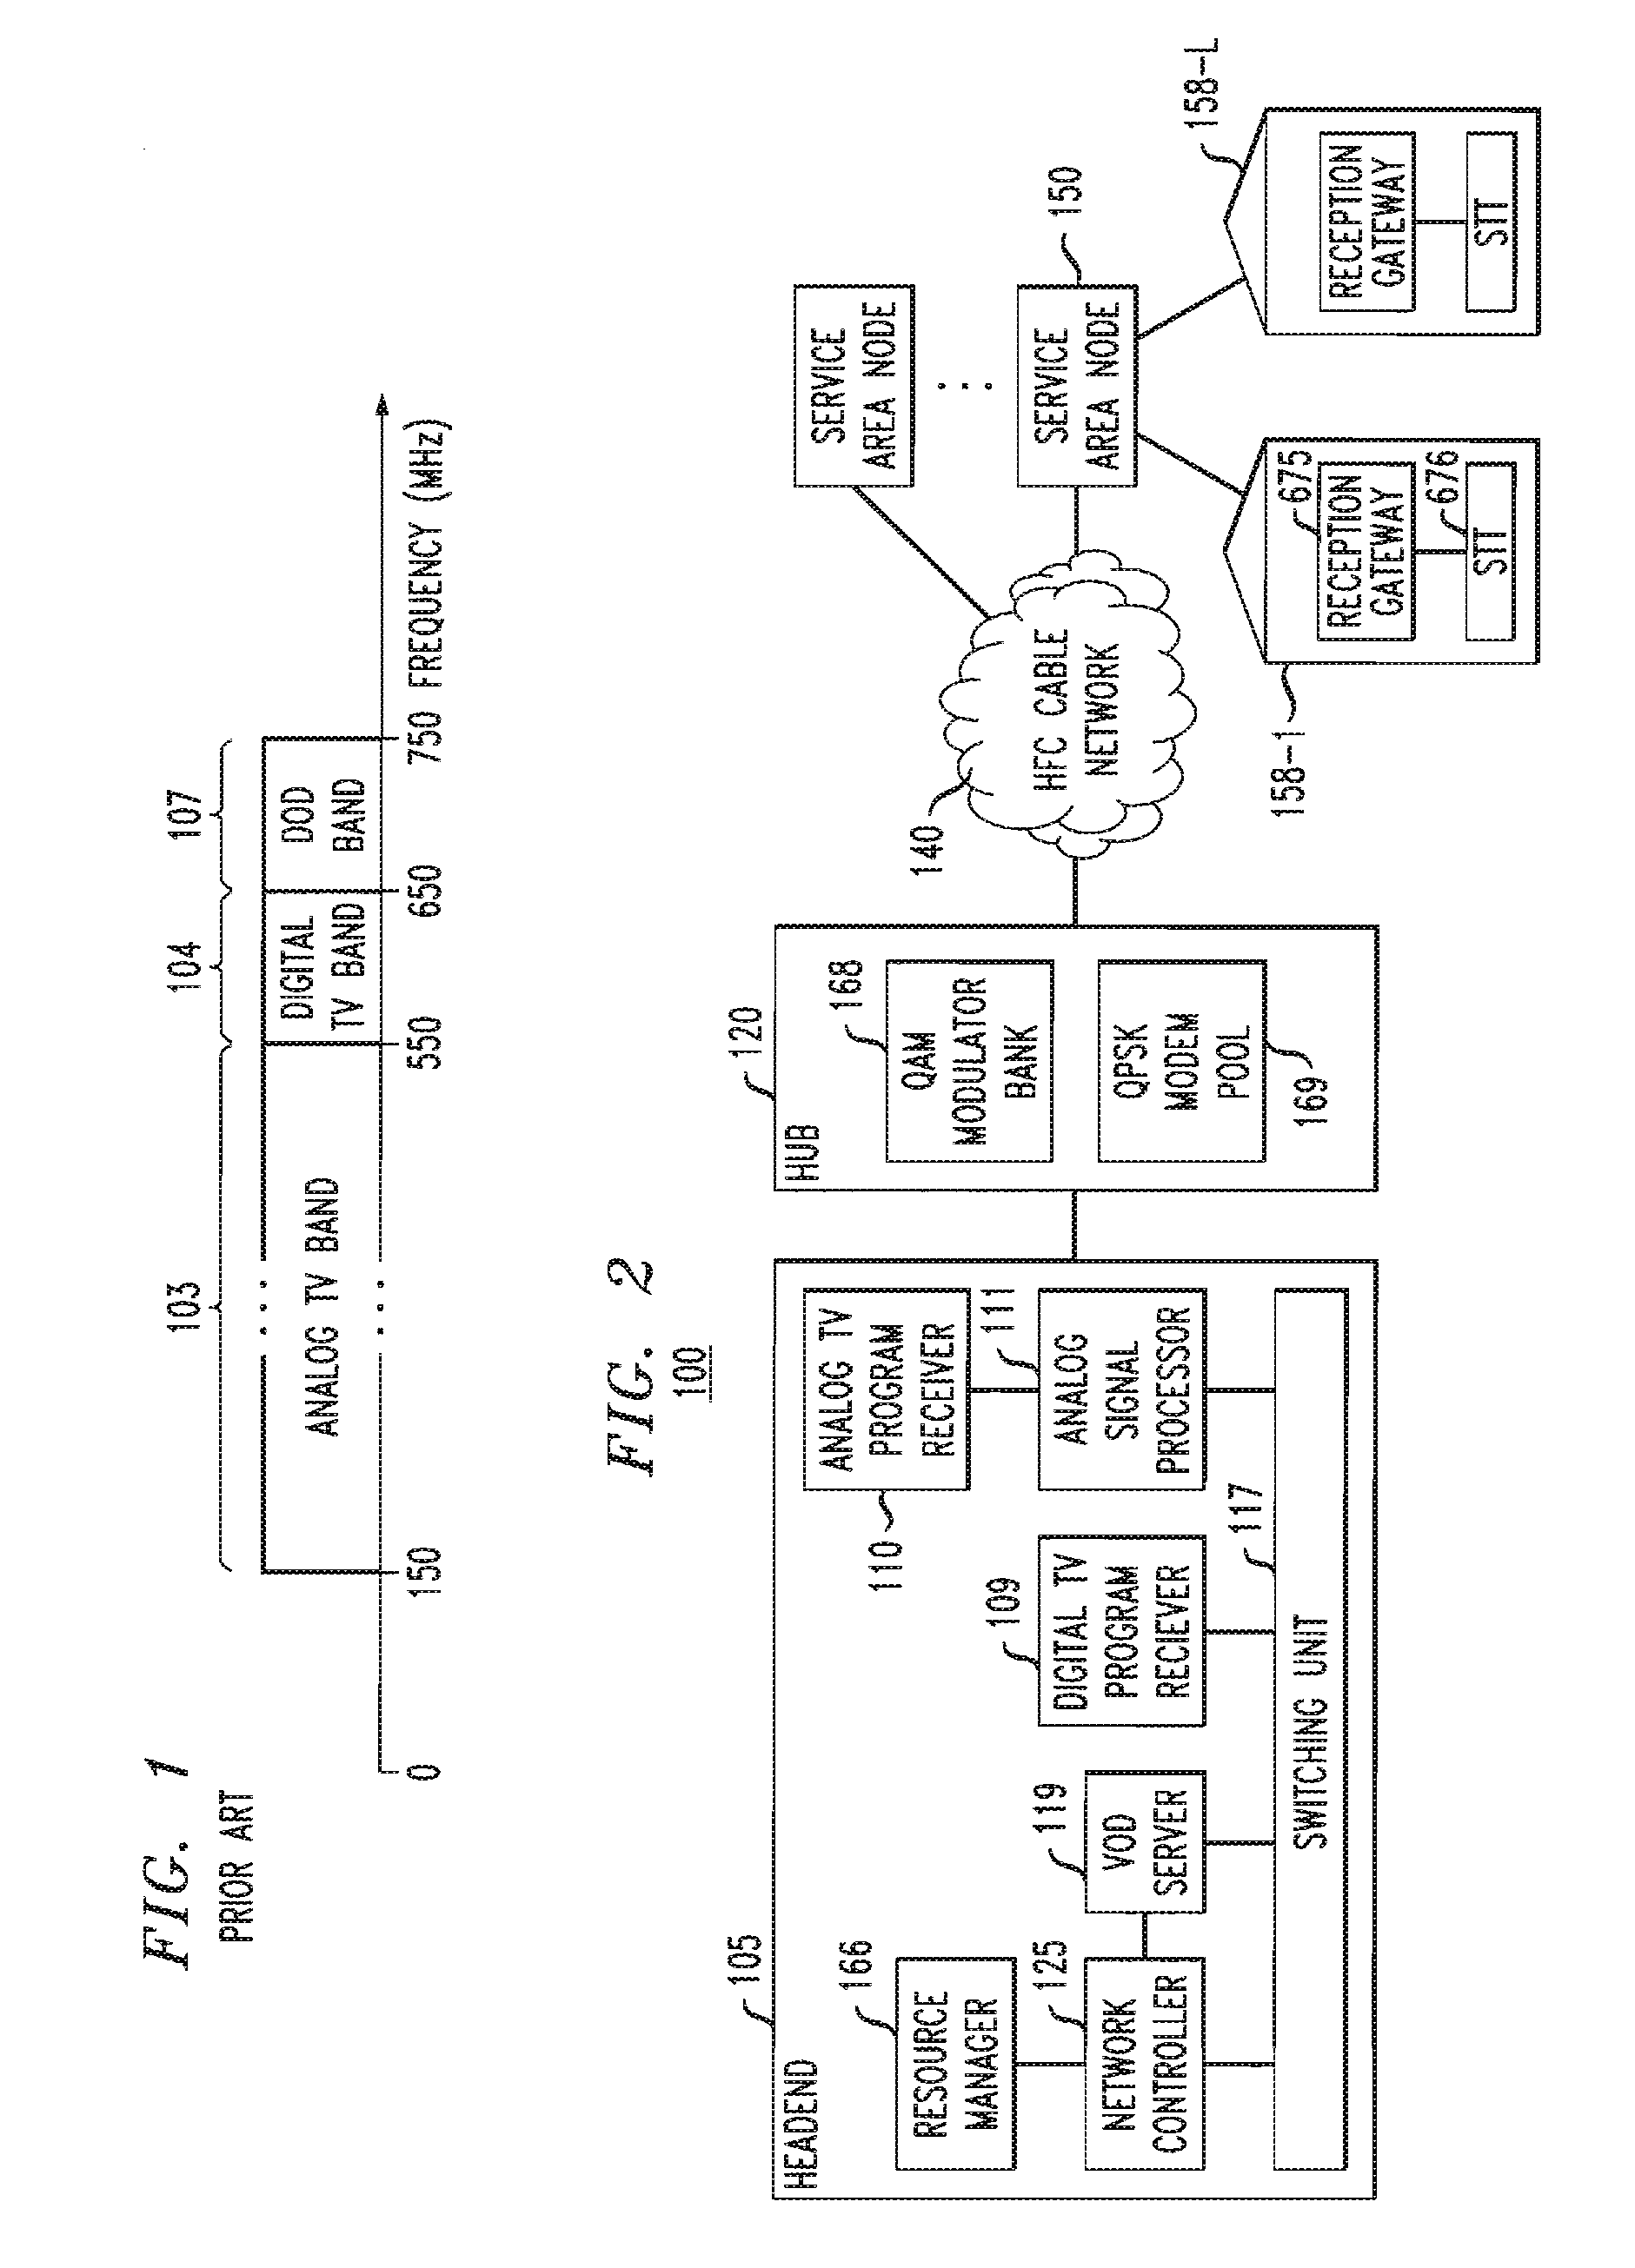 Apparatus and method for increasing upstream capacity in a broadband communications system